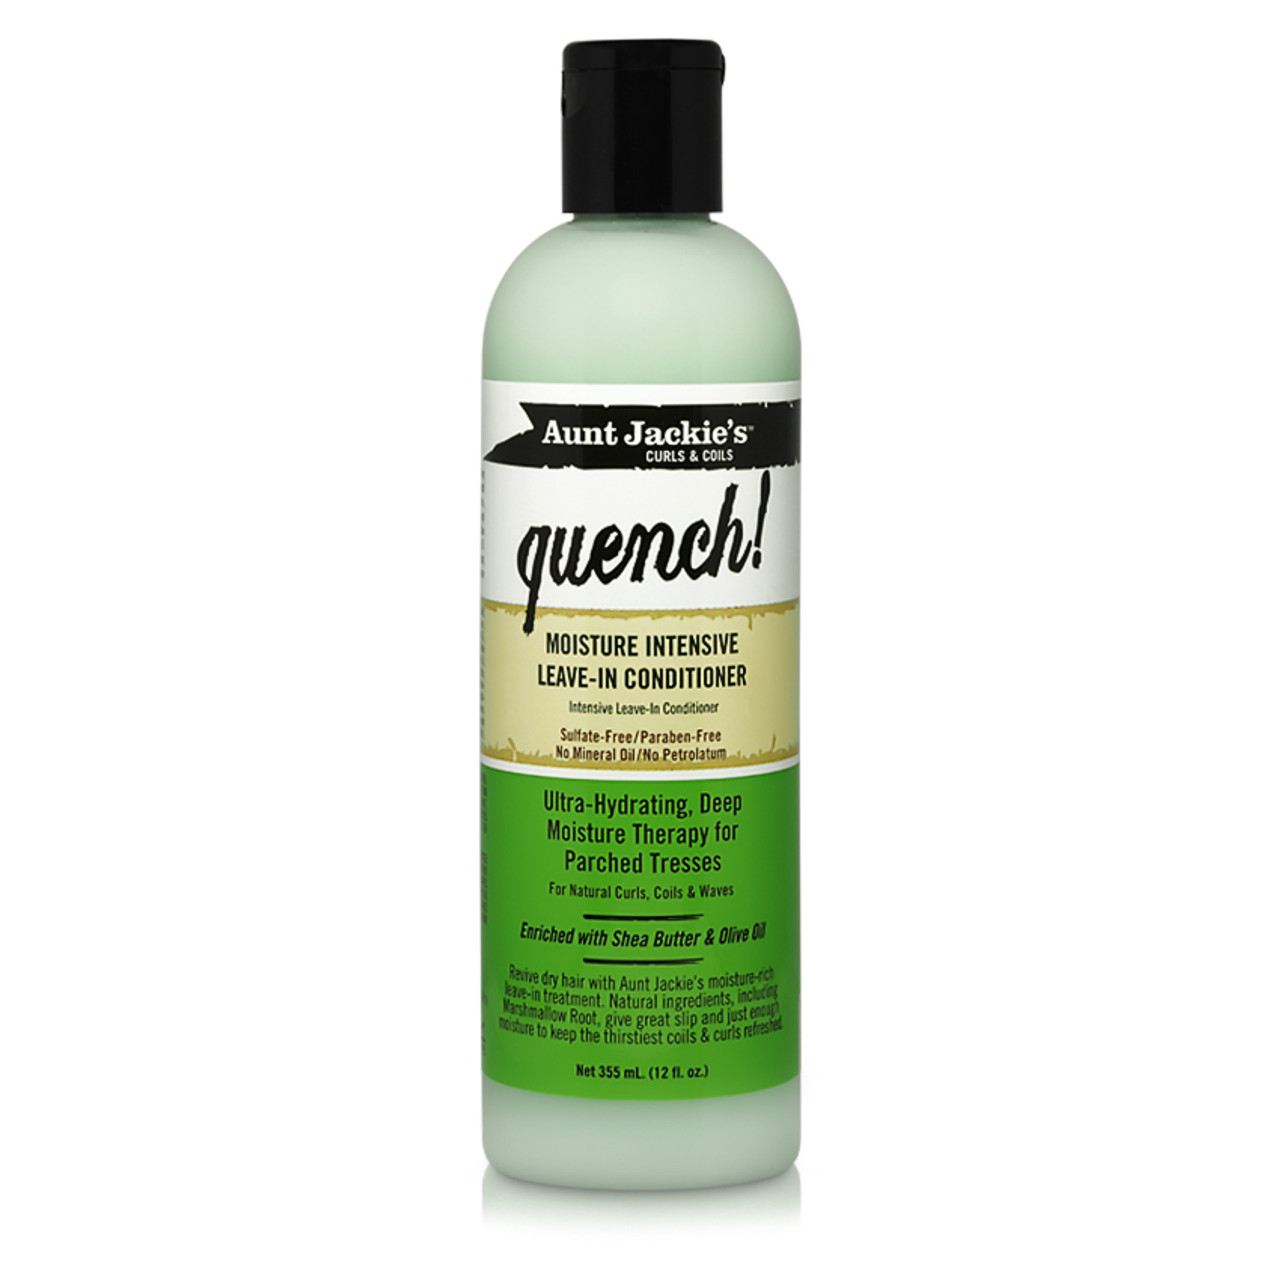 Aunt Jackie's Curls & Coils Quench! Moisture Intensive LeaveIn Conditioner  (12 oz.) - NaturallyCurly